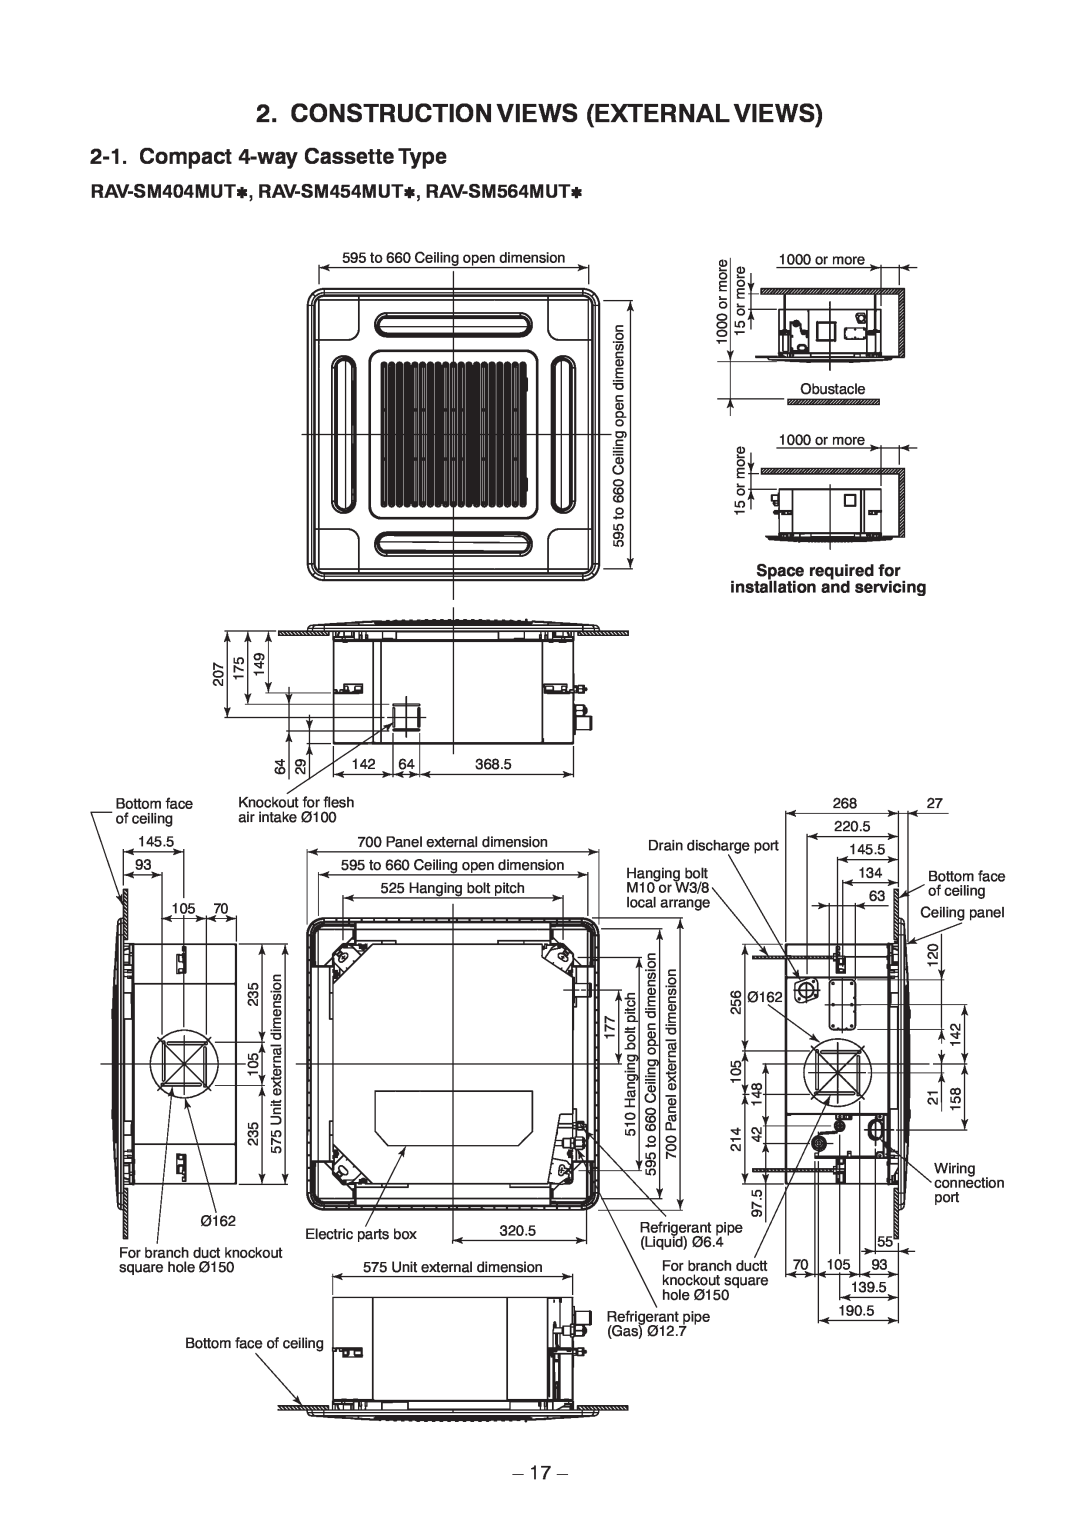 Toshiba CONCEALED DUCK TYPE, CEILING TYPE service manual Construction Views External Views, Compact 4-wayCassette Type, 17 